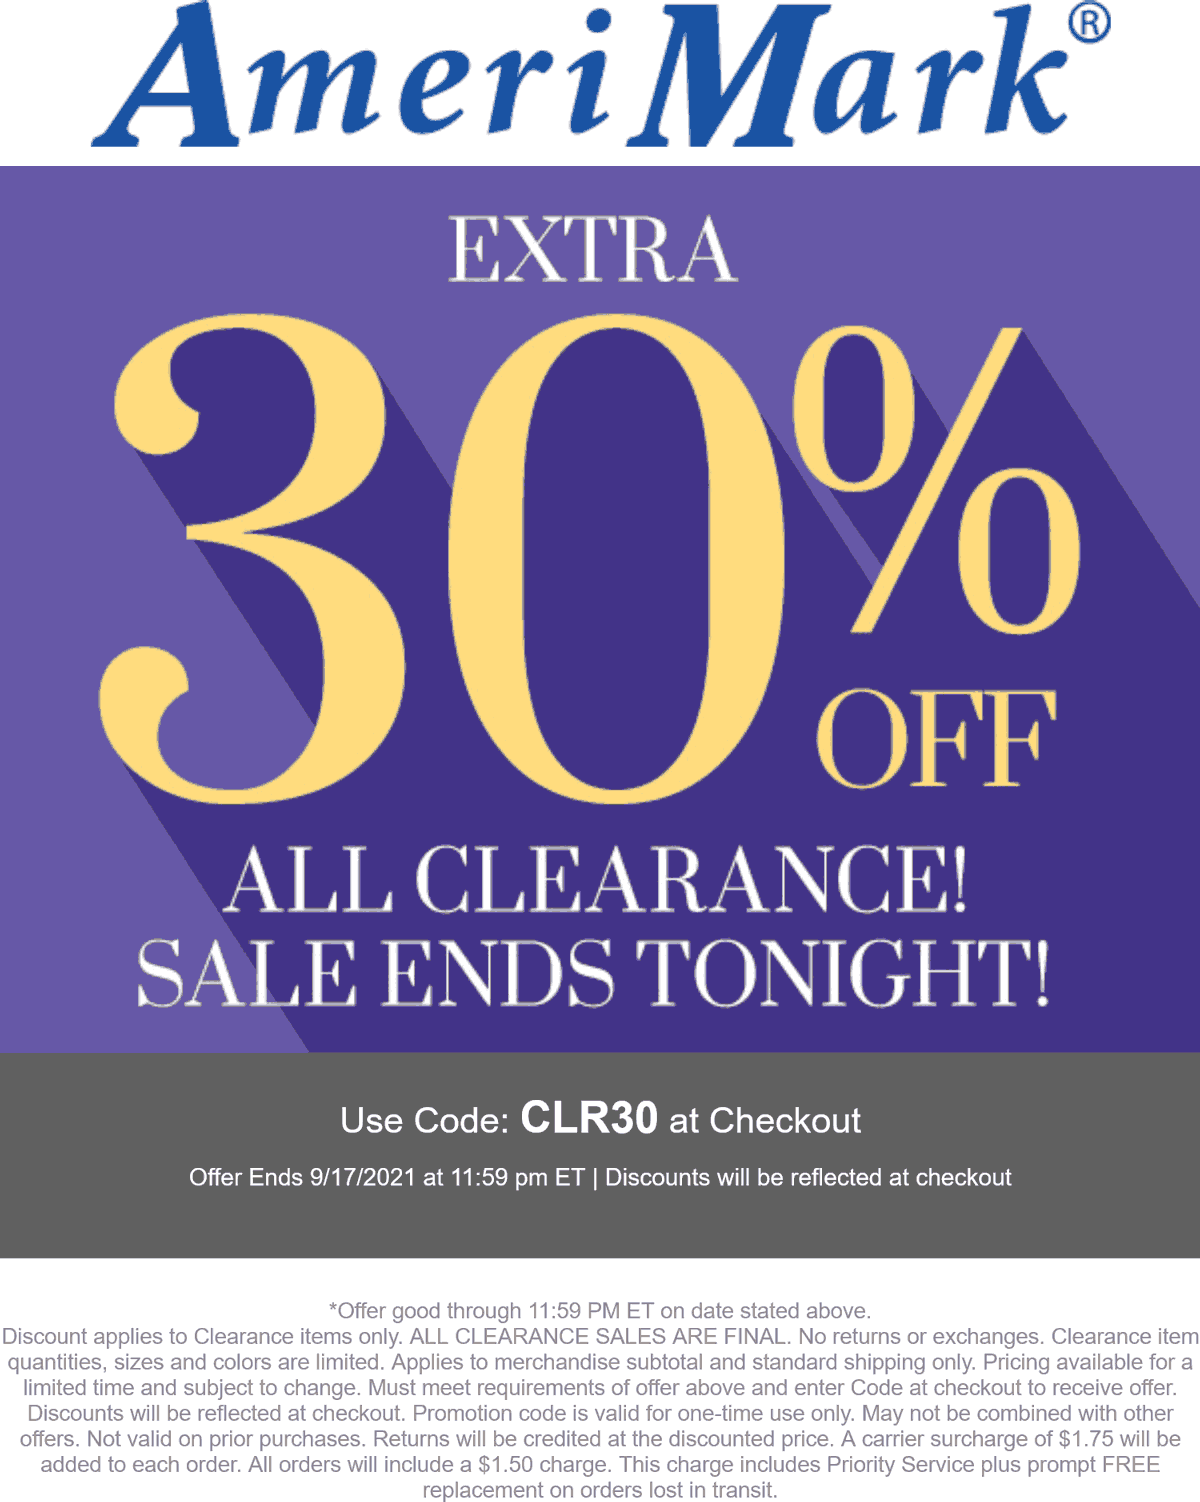 AmeriMark stores Coupon  Extra 30% off all clearance today at AmeriMark via promo code CLR30 #amerimark 